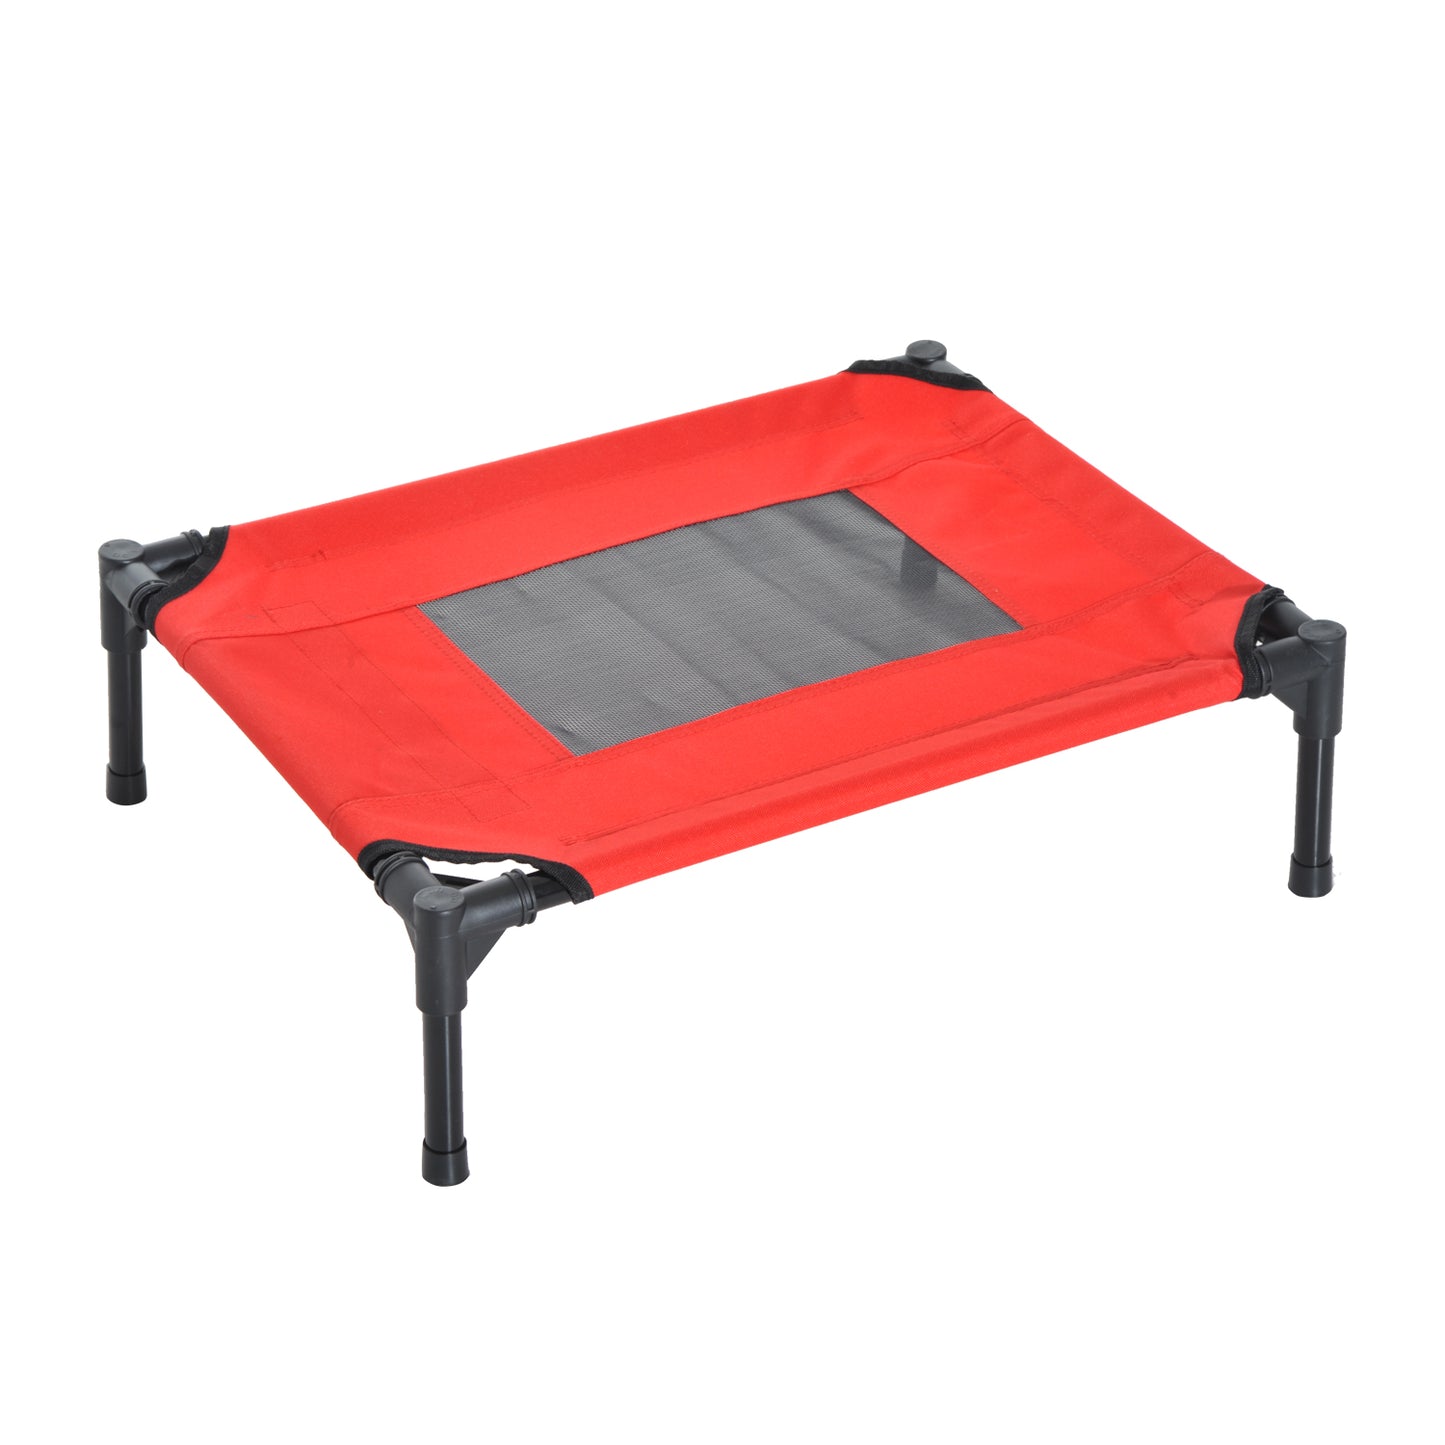 PawHut Elevated Pet Bed Portable Camping Raised Dog Bed w/ Metal Frame Black, Red (Small)